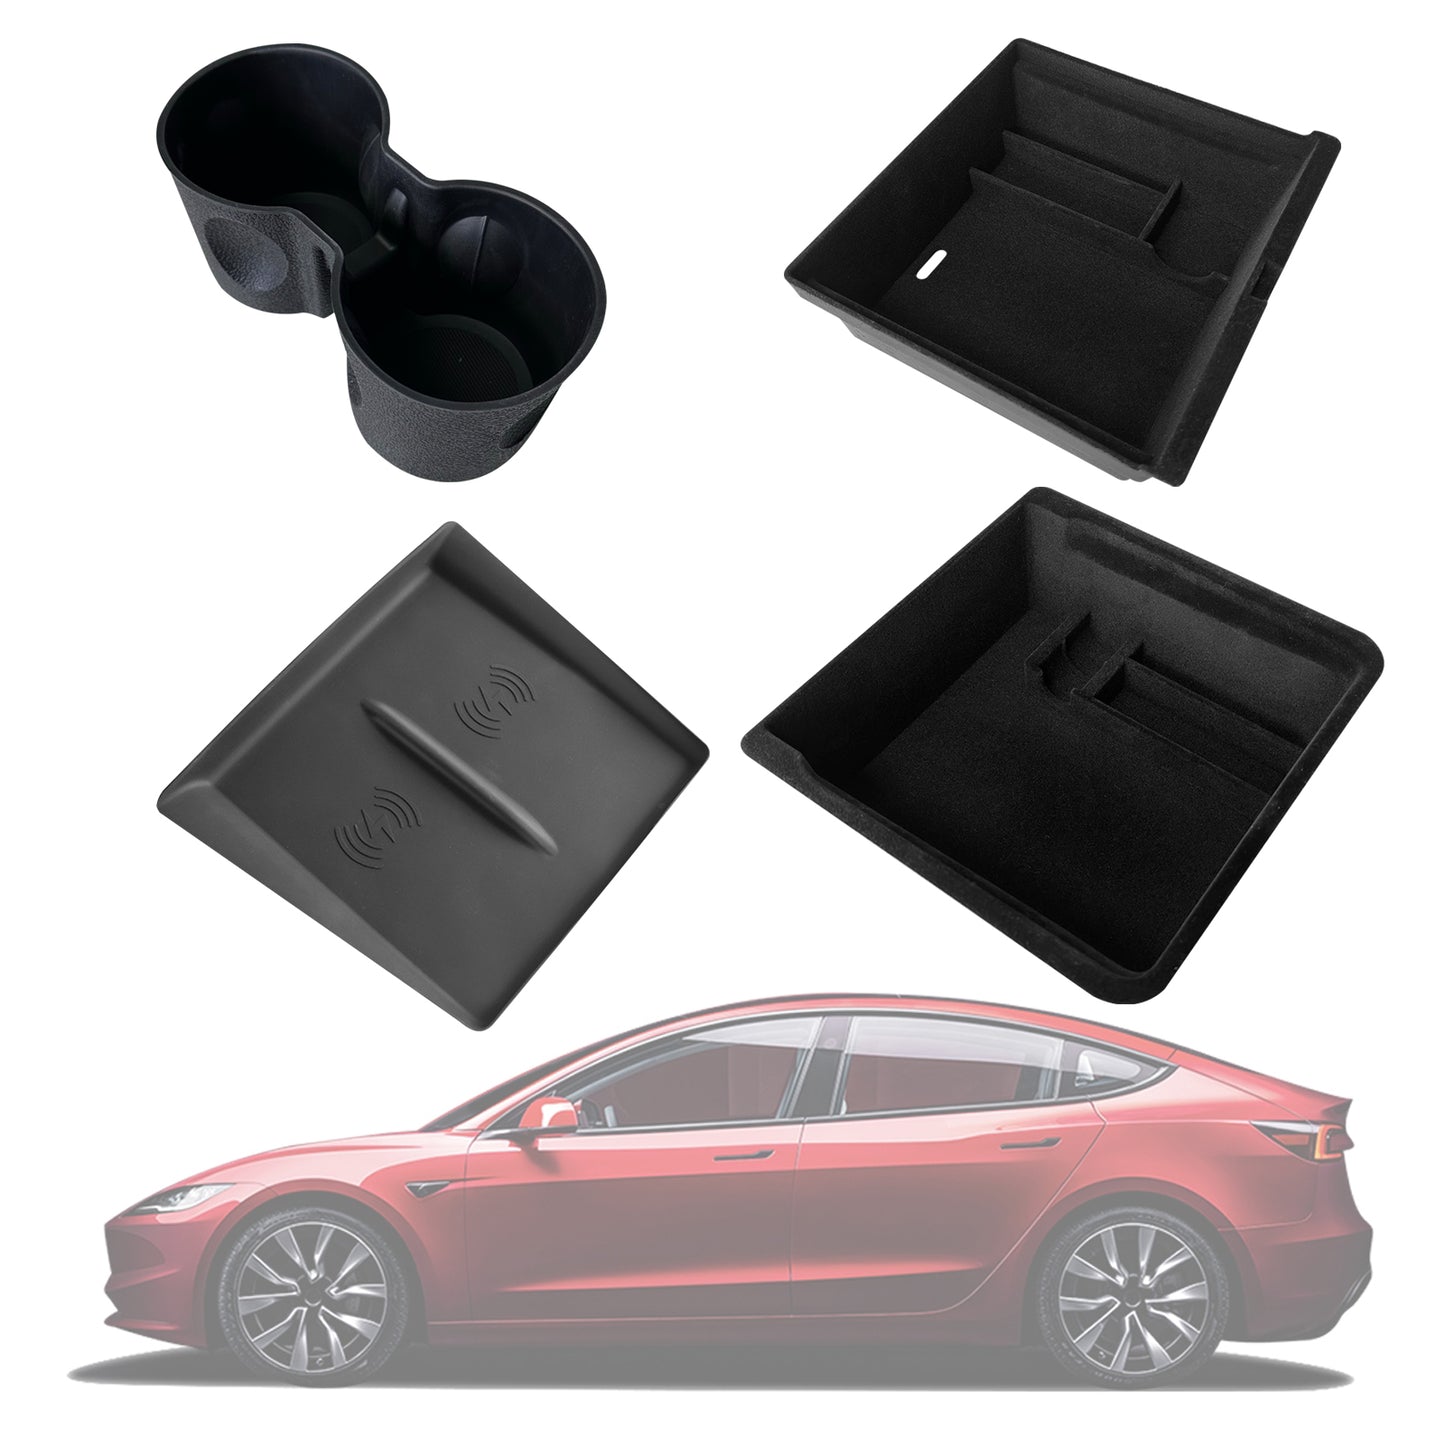 Center Console Organizer Tray Flocked Car Accessories Set for Tesla Model 3 Highland